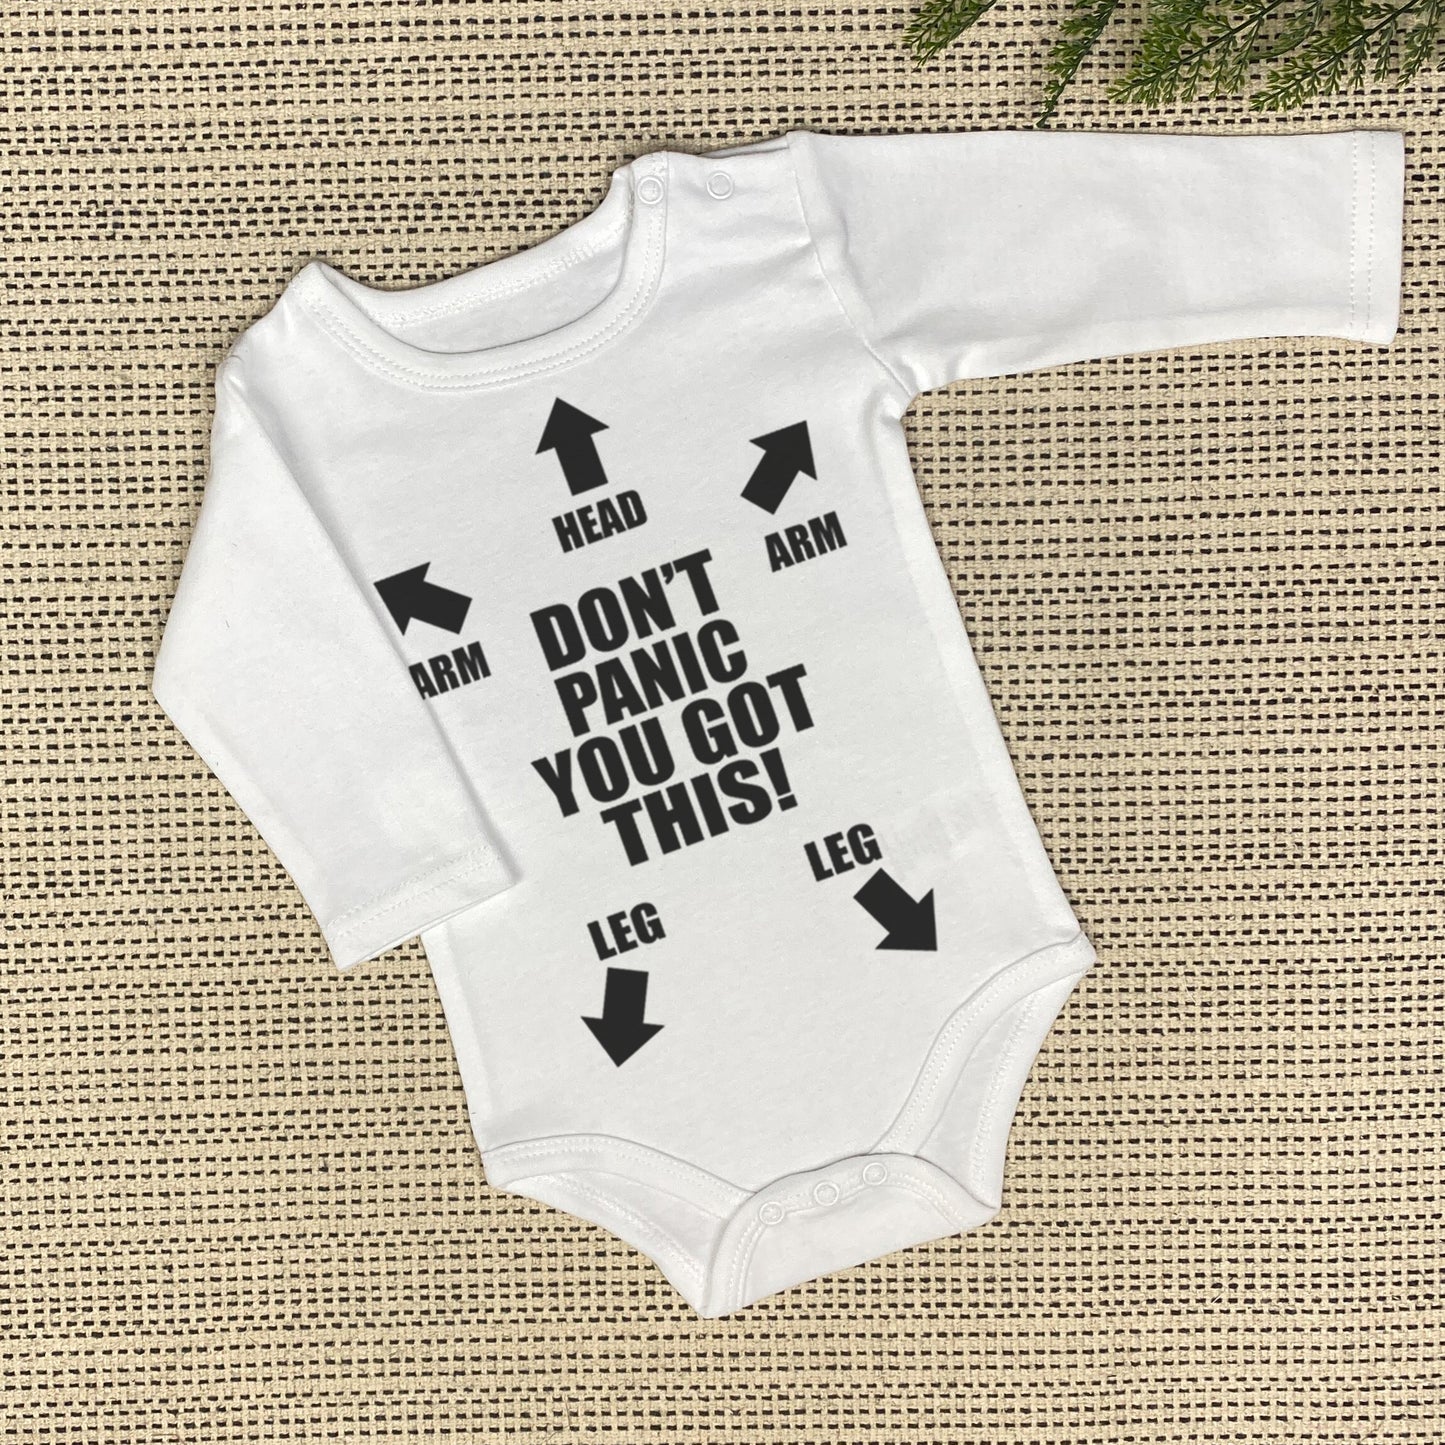 Don't Panic, You Got This Onesie